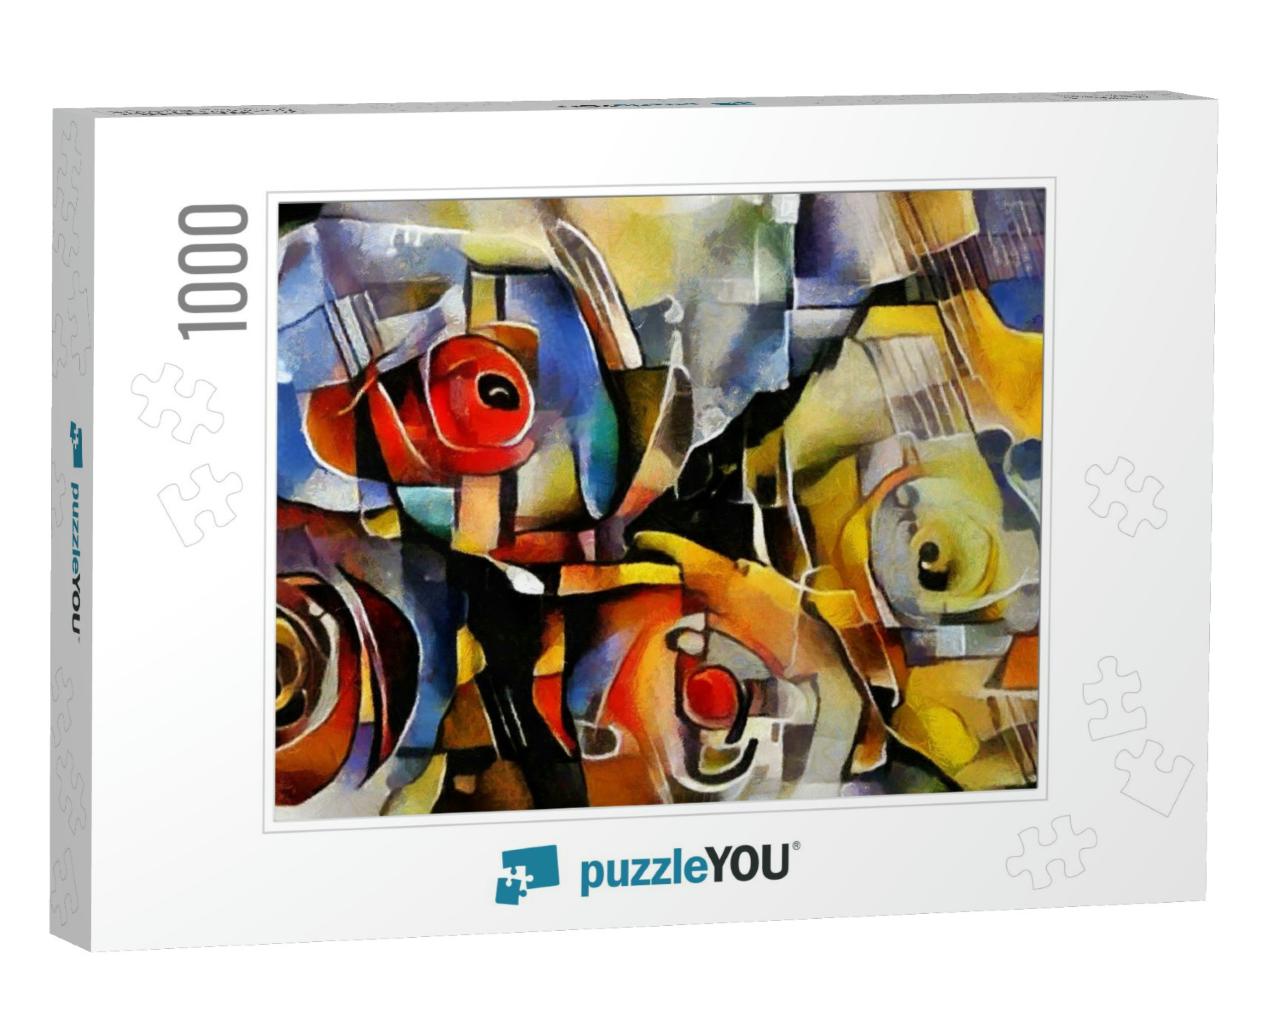 A Bouquet of Beautiful Flowers in a Modern Style & Cubism... Jigsaw Puzzle with 1000 pieces